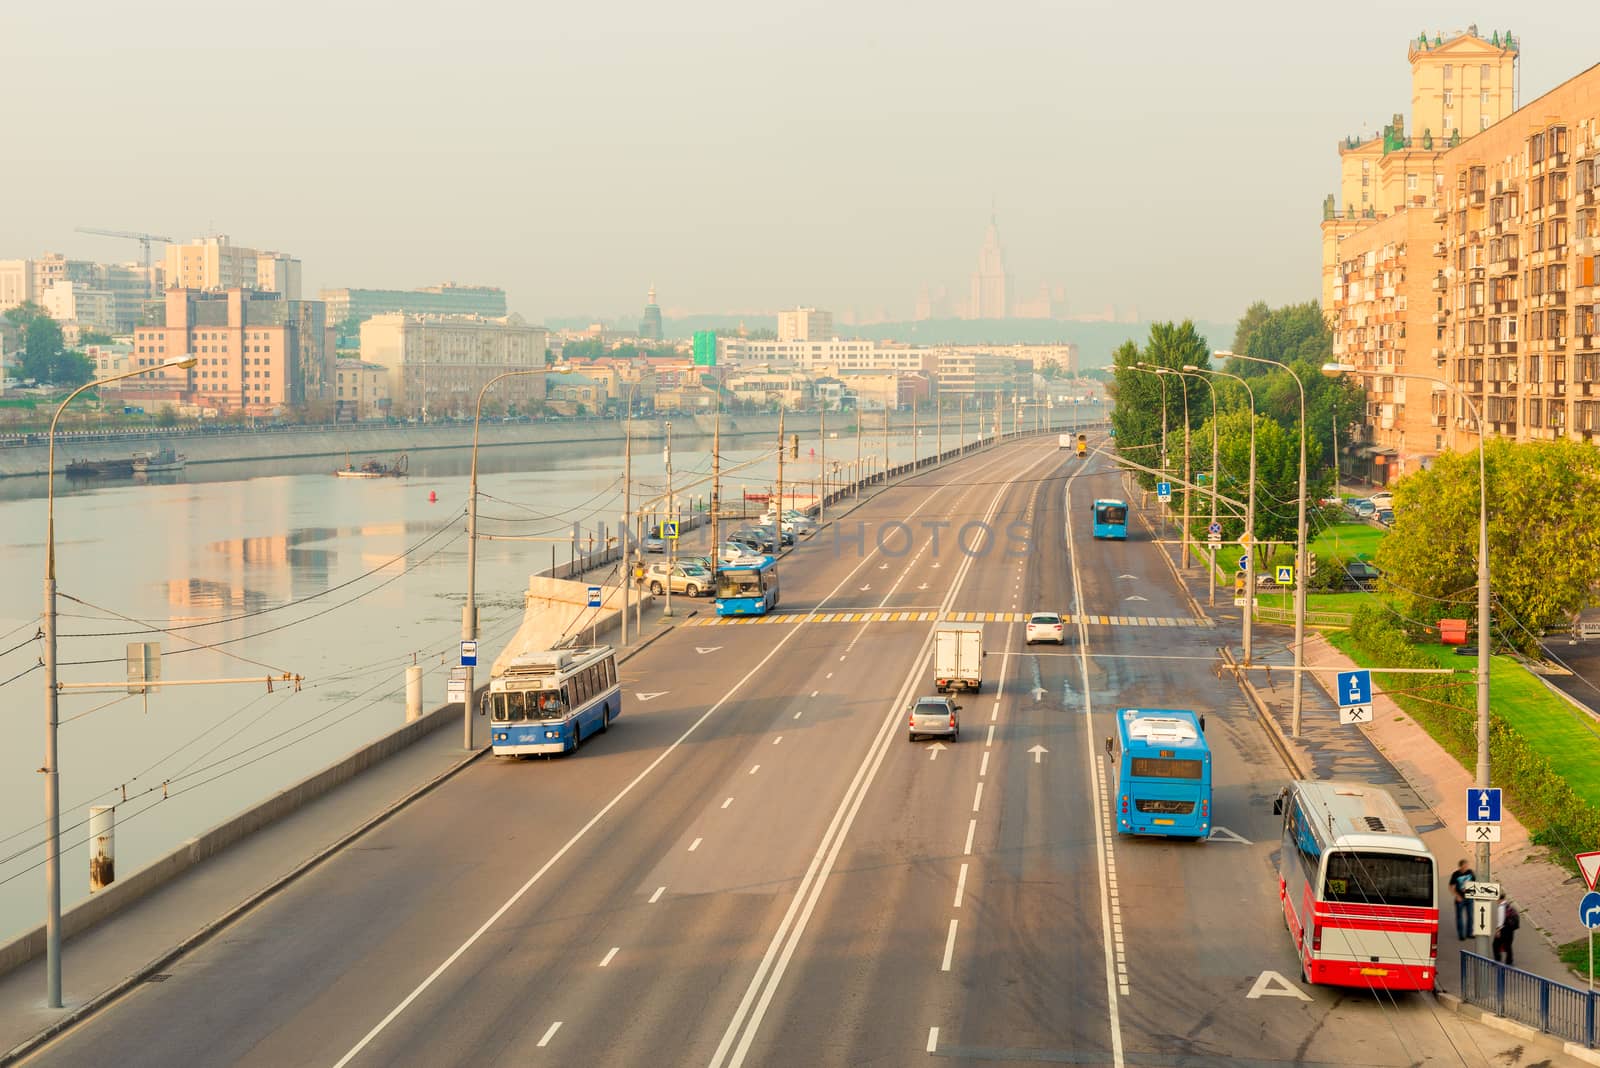 Moscow cityscape - view of the river and the road in the early m by kosmsos111